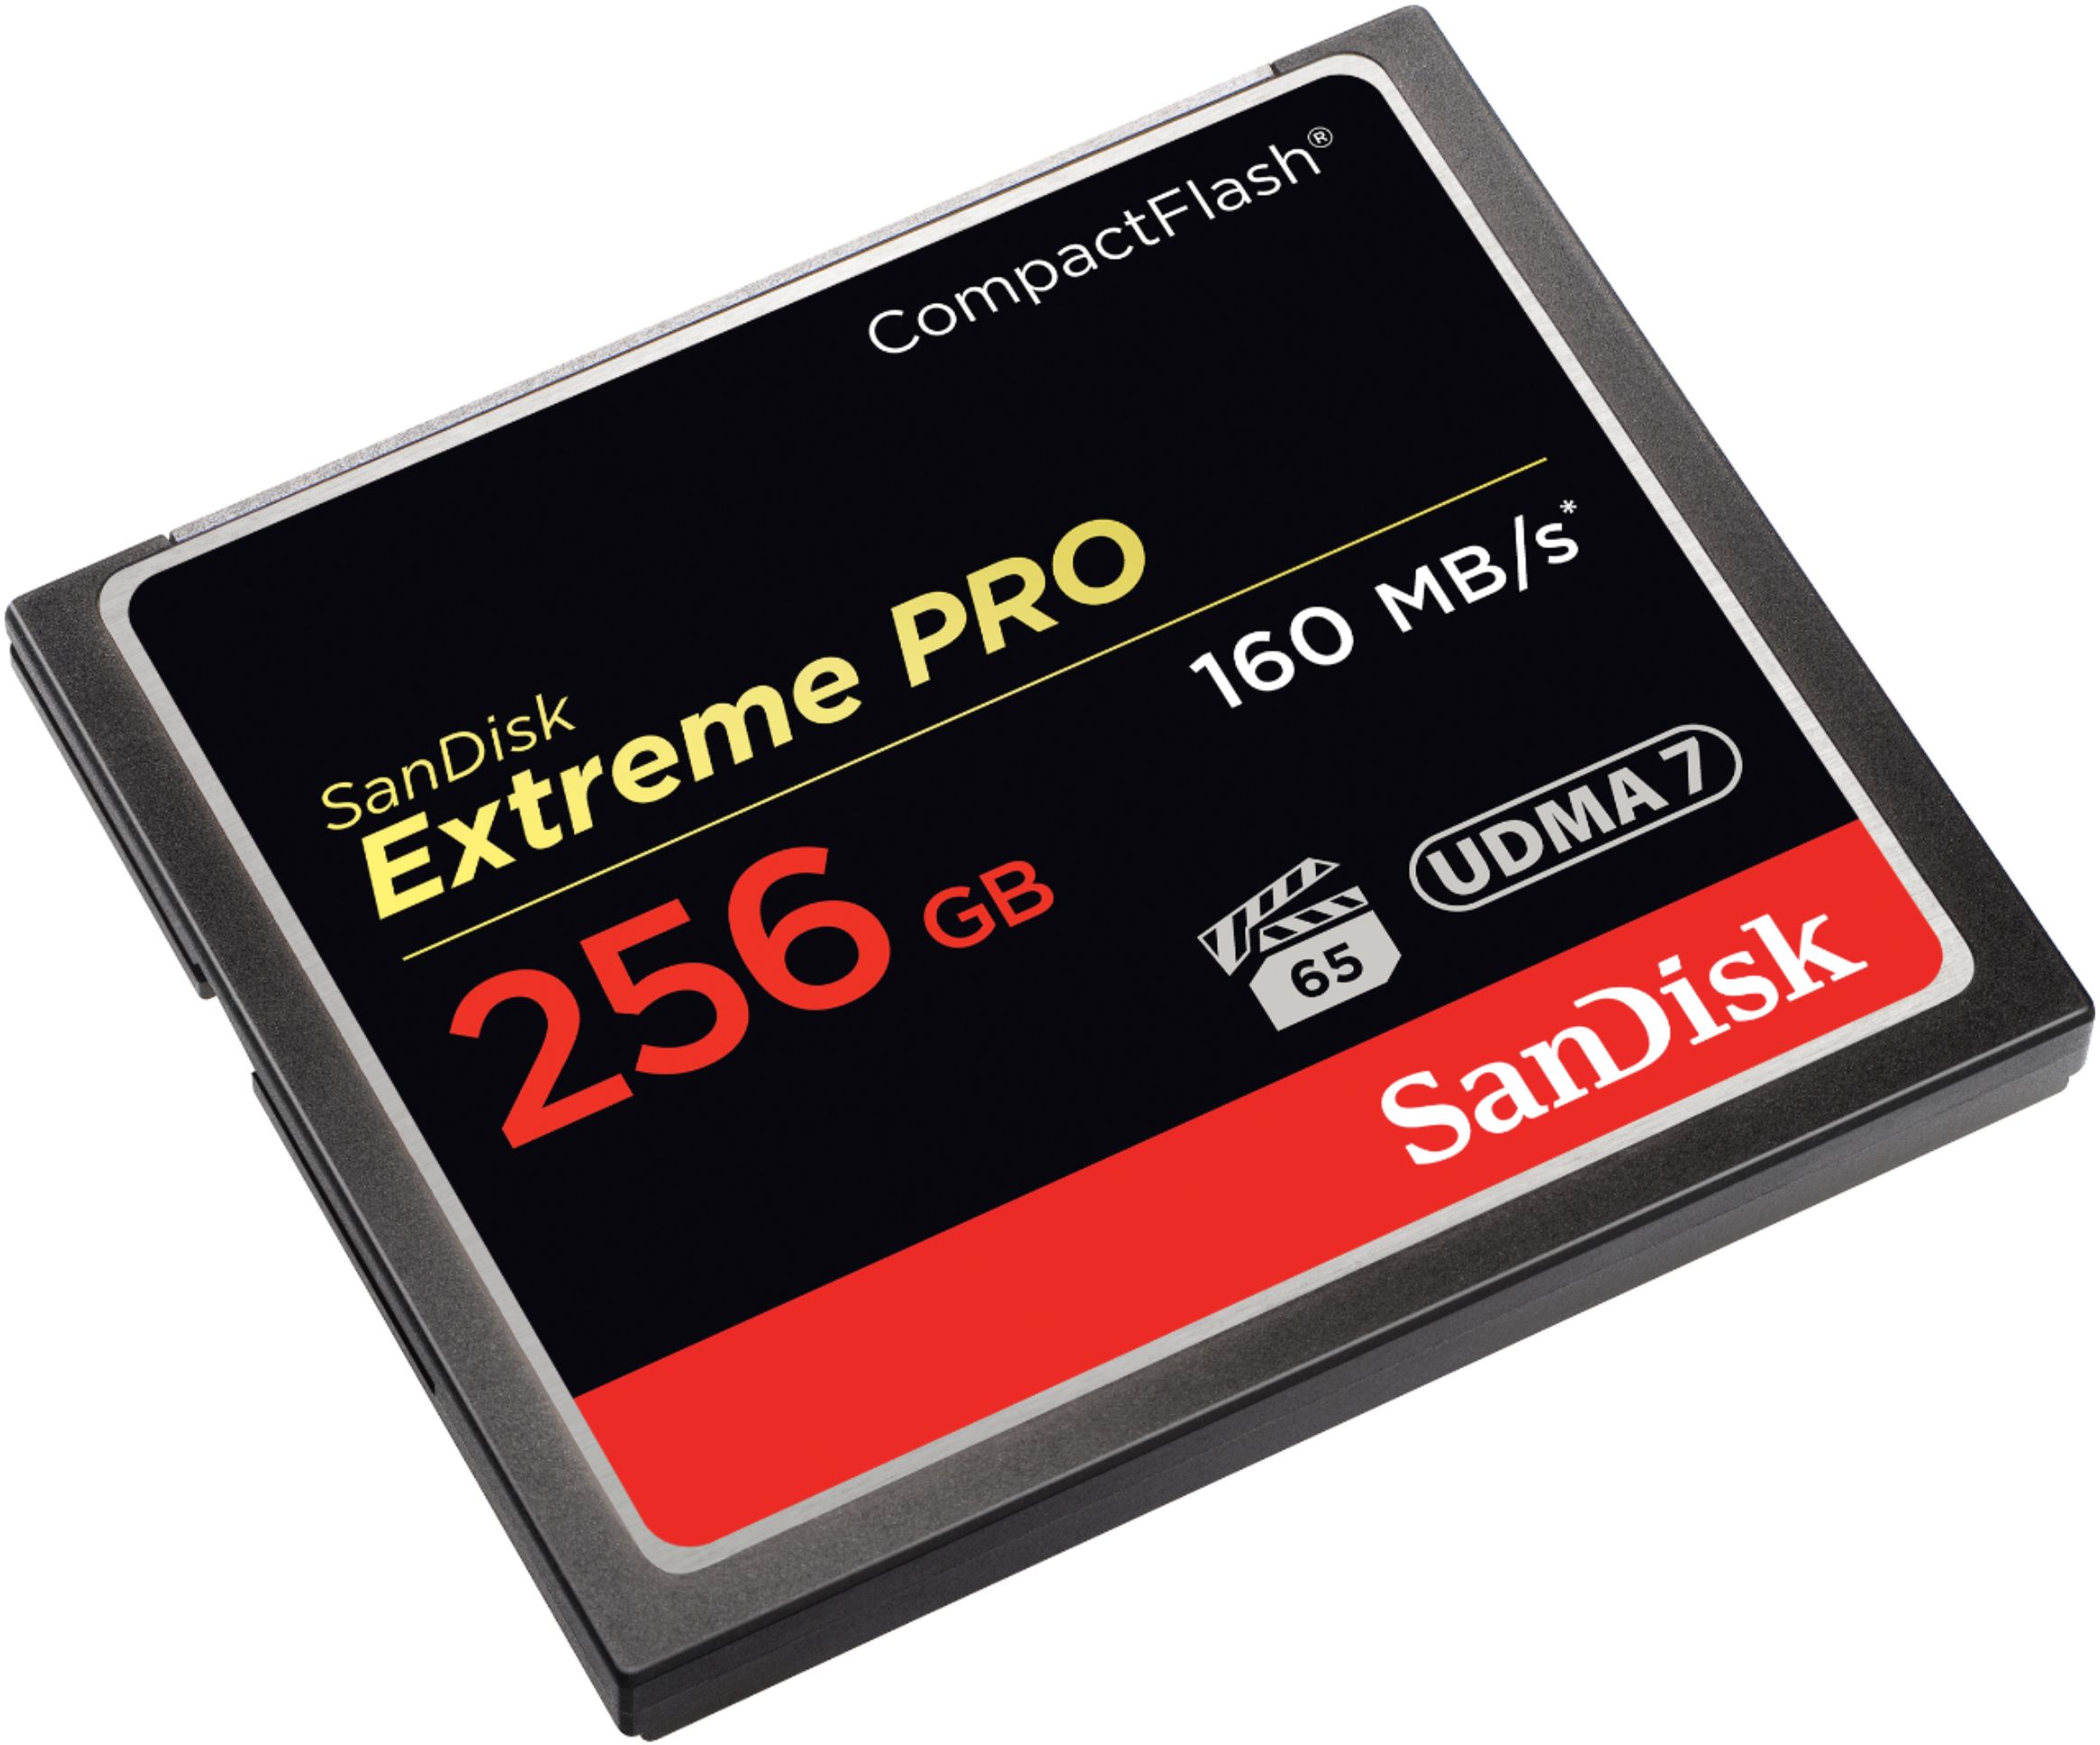 SanDisk 32GB Ultra SDHC Card Review: Sluggish Card, But A Tempting Price